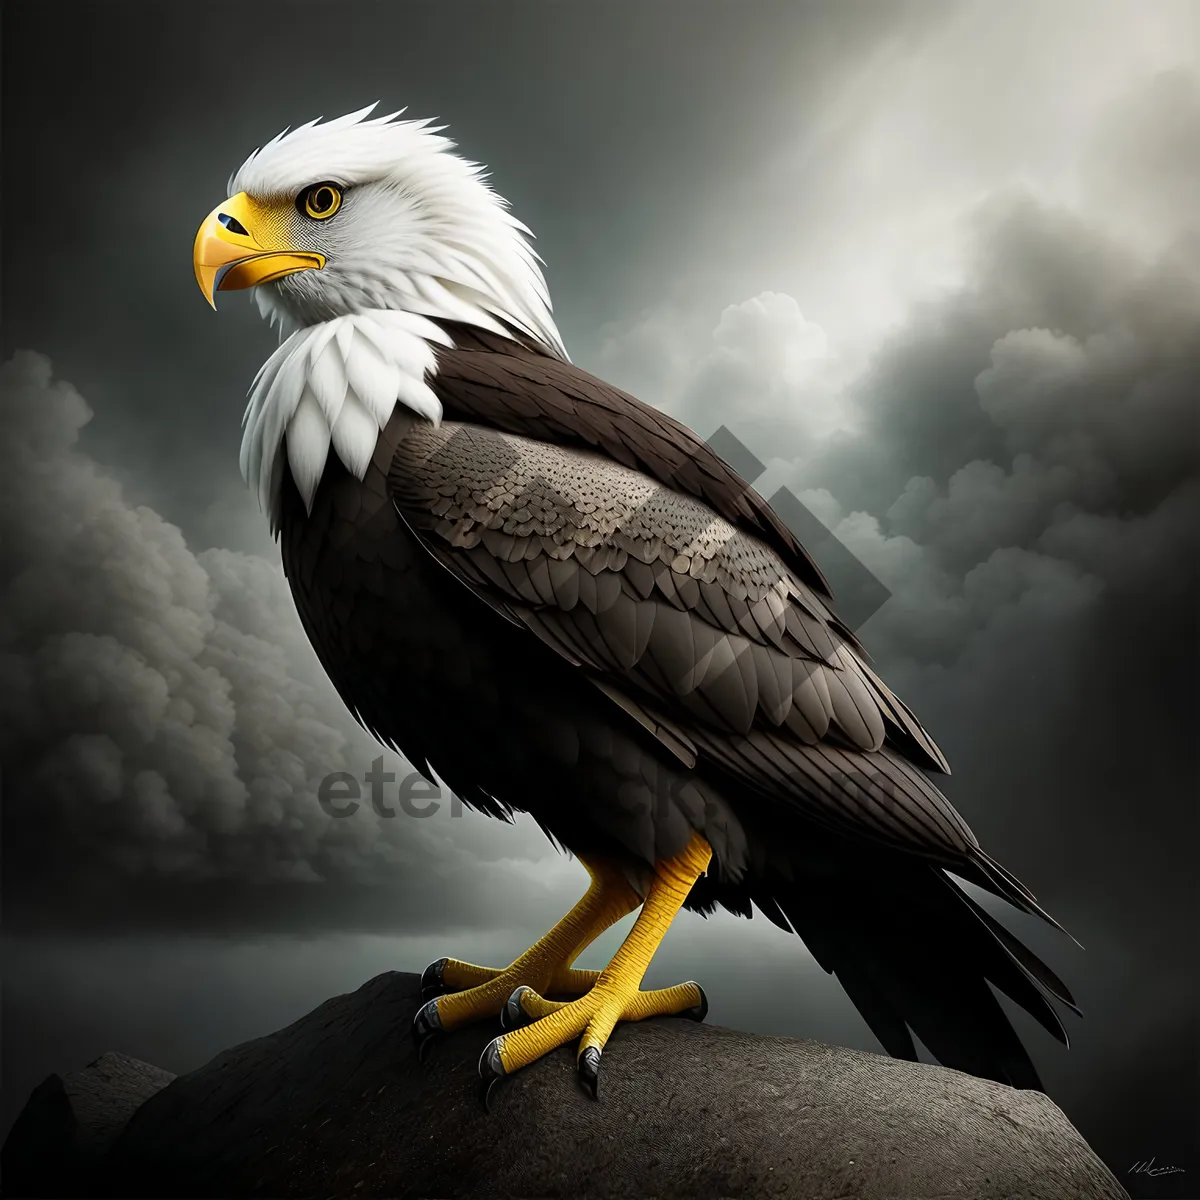 Picture of Bald Eagle soaring with piercing gaze